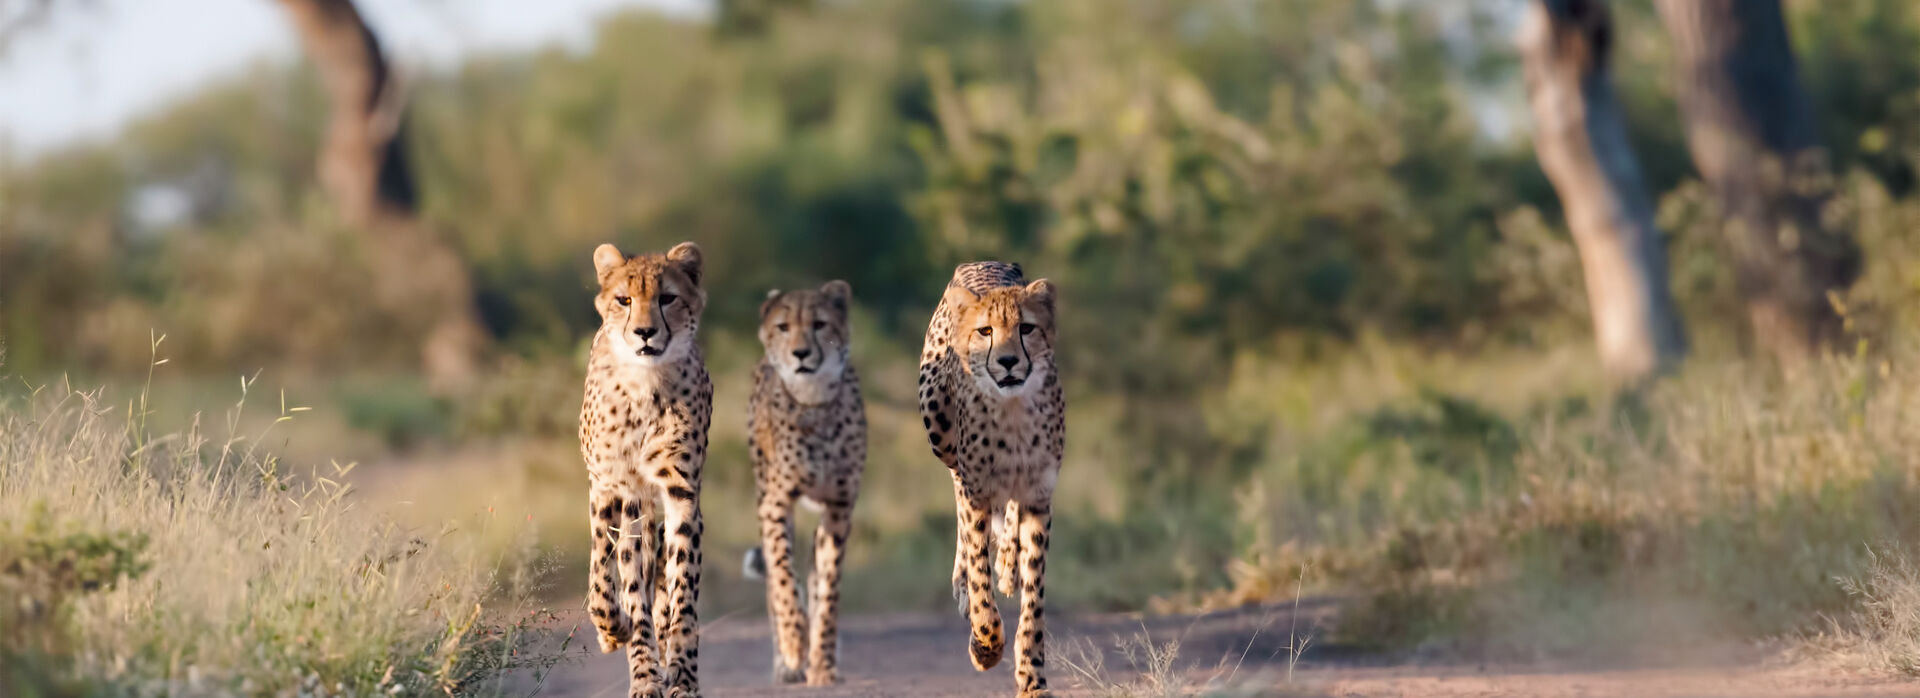 Hero South Africa Greater Kruger Three Cheetah0